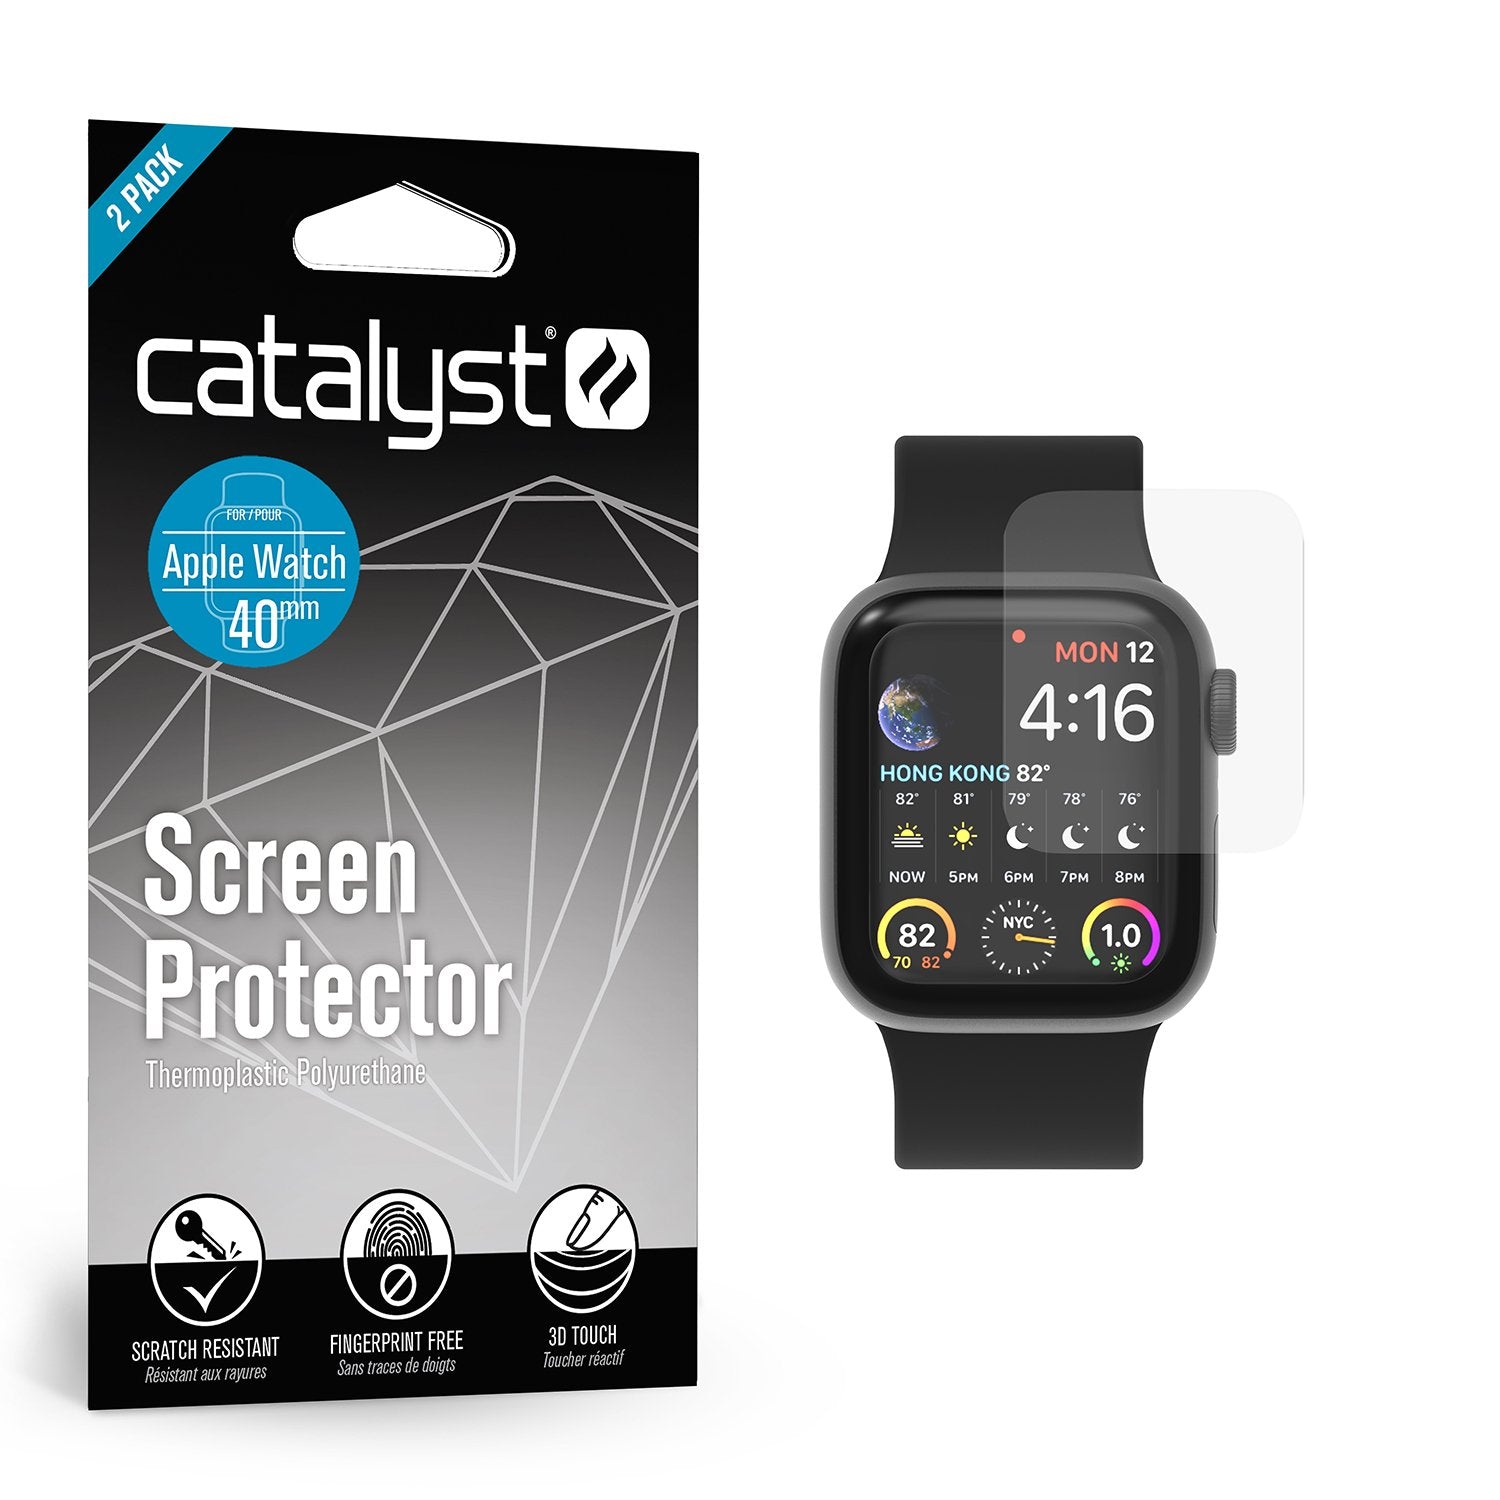 Buy Screen Protector for 40mm Apple Watch - 2 Pack by Catalyst®